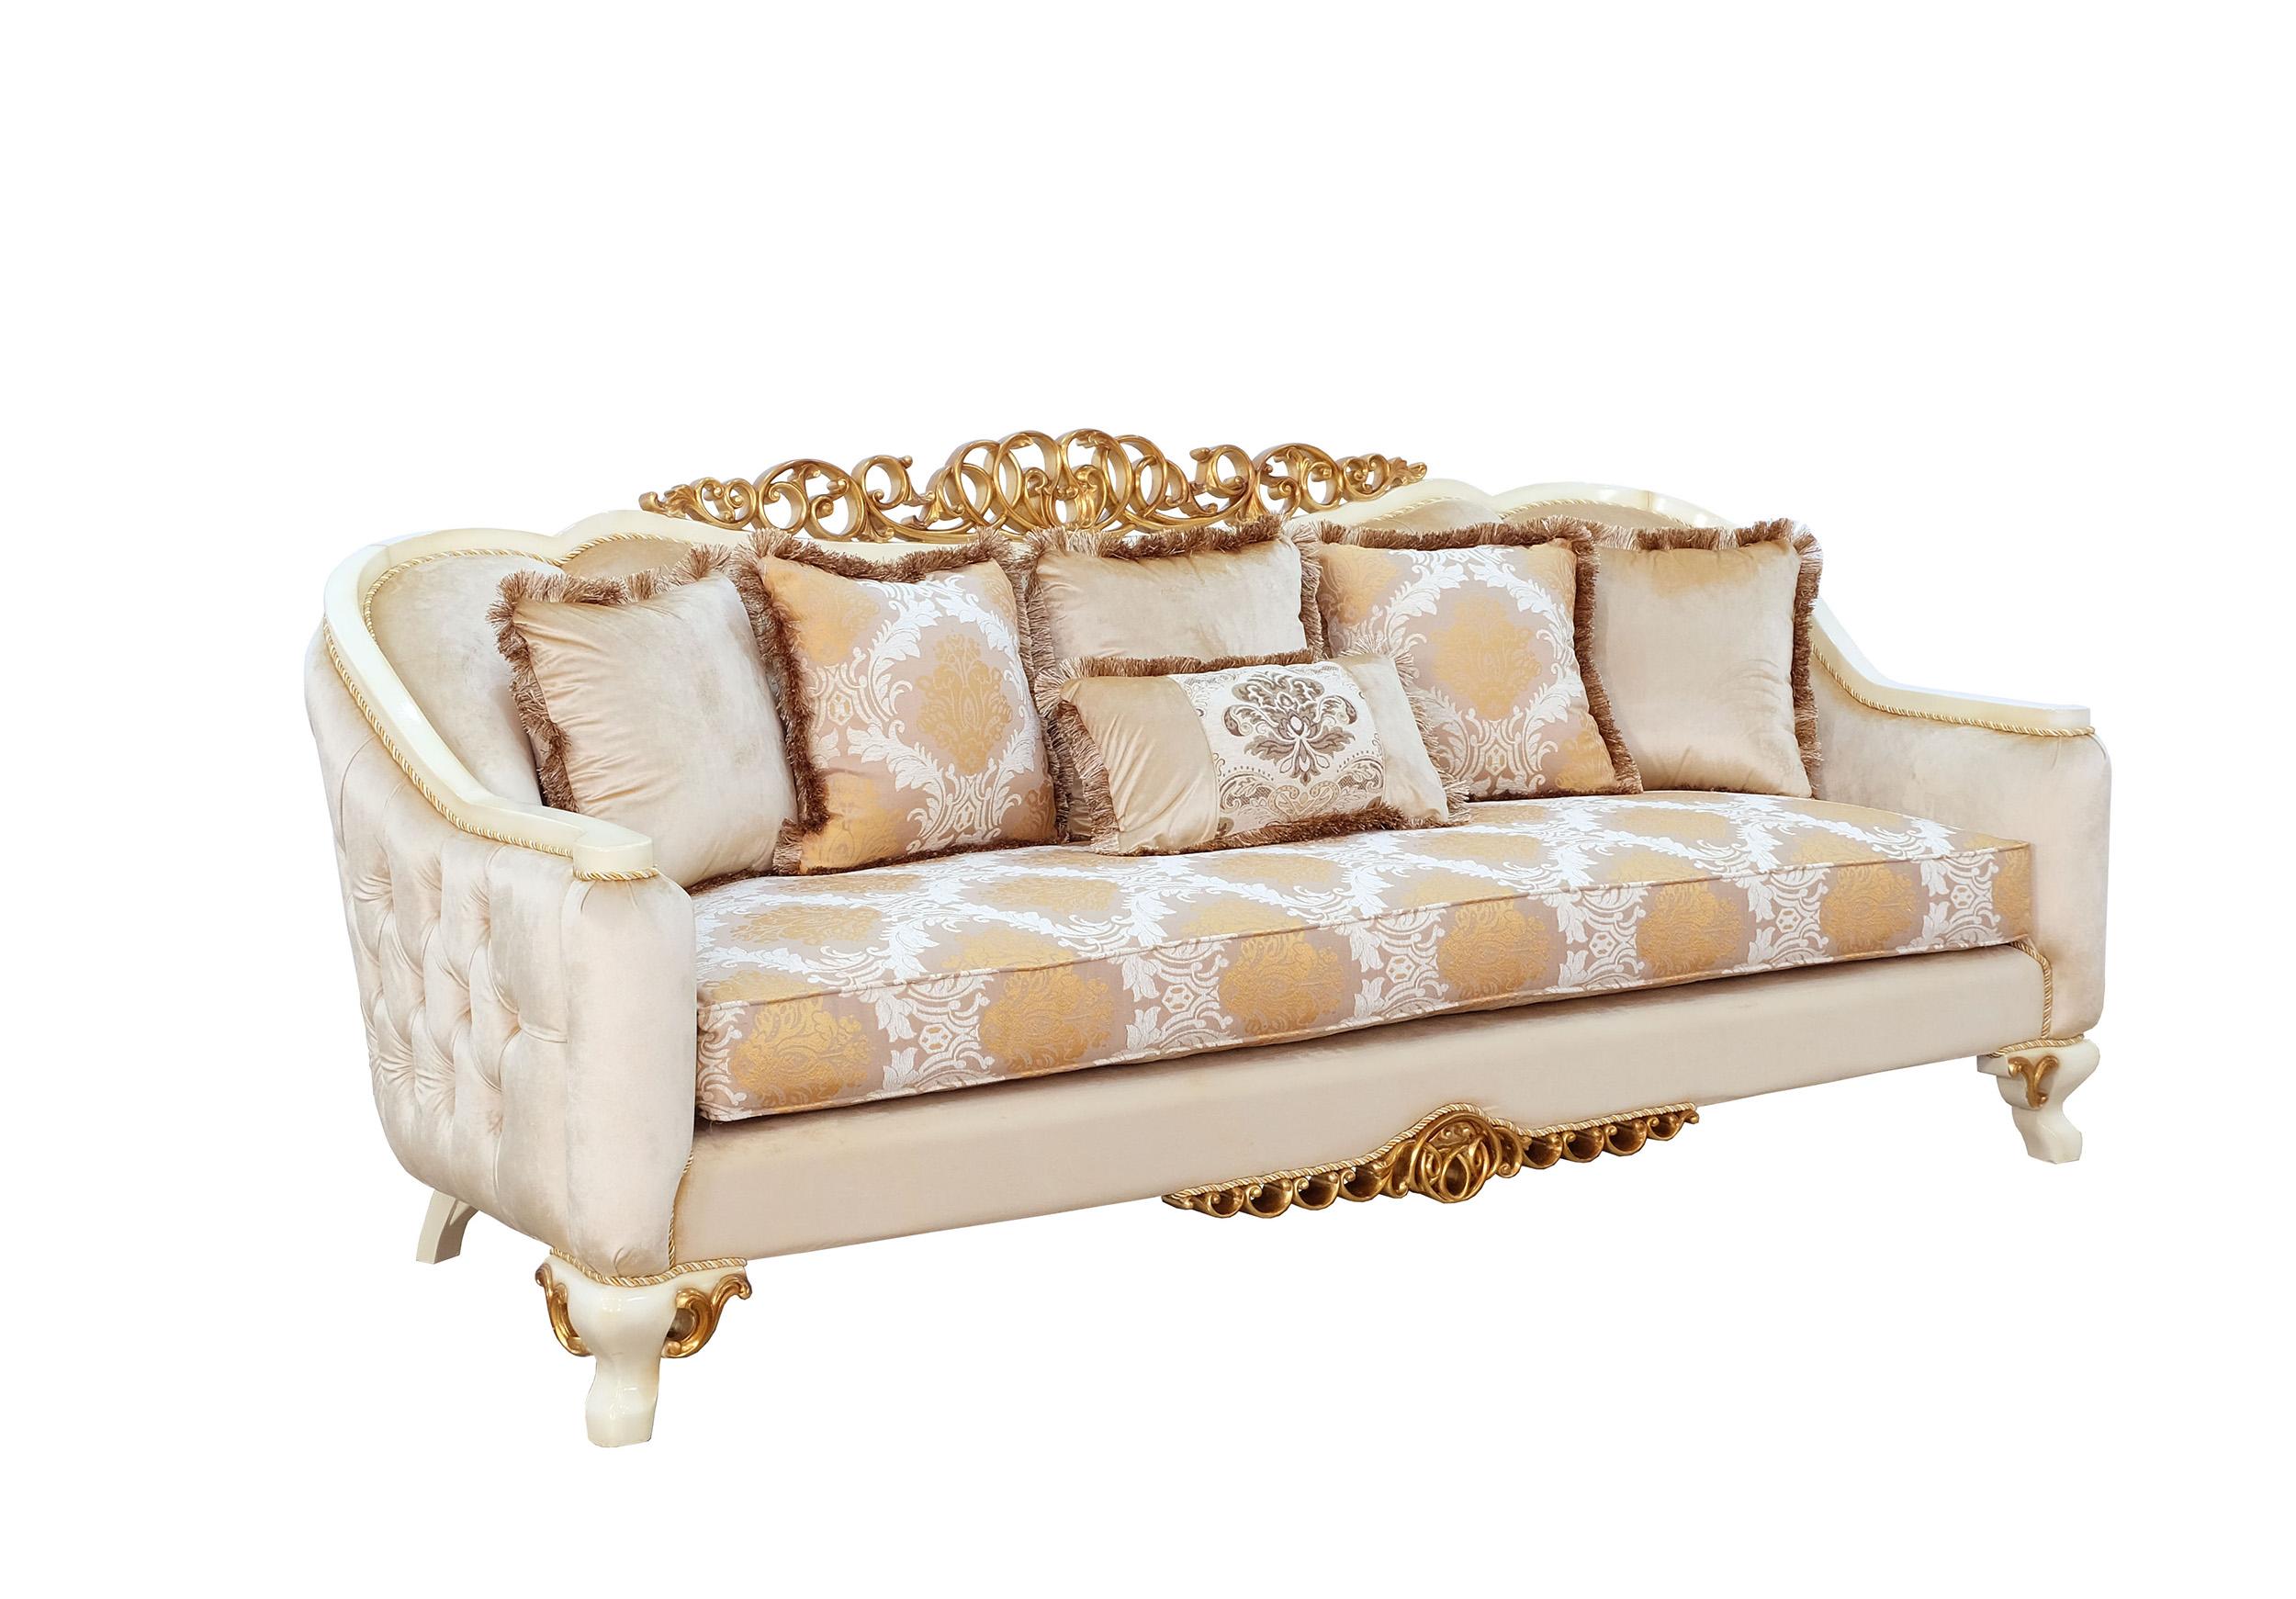 Classic, Traditional Sofa ANGELICA 45352-S in Antique, Gold, Beige Fabric